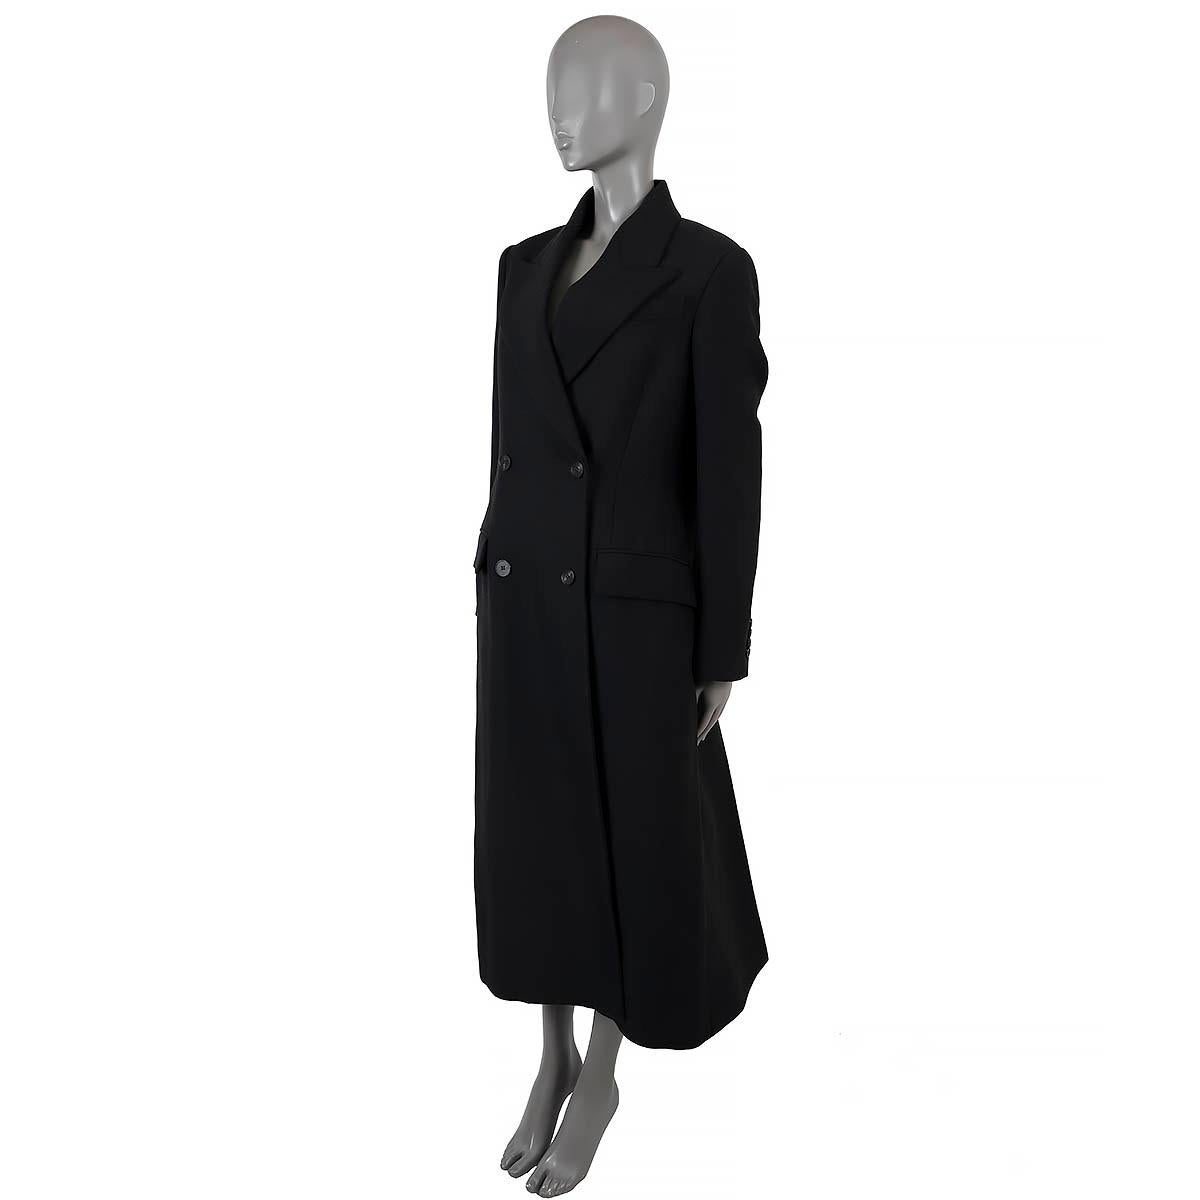 100% authentic Alexander McQueen double-breasted coat in black wool (75%) and polyamide (25%). Features a long, tailored silhouette with lace-up detail in the back, that beautifully cinches the waist, peak lapels and two flap pockets at the waist.